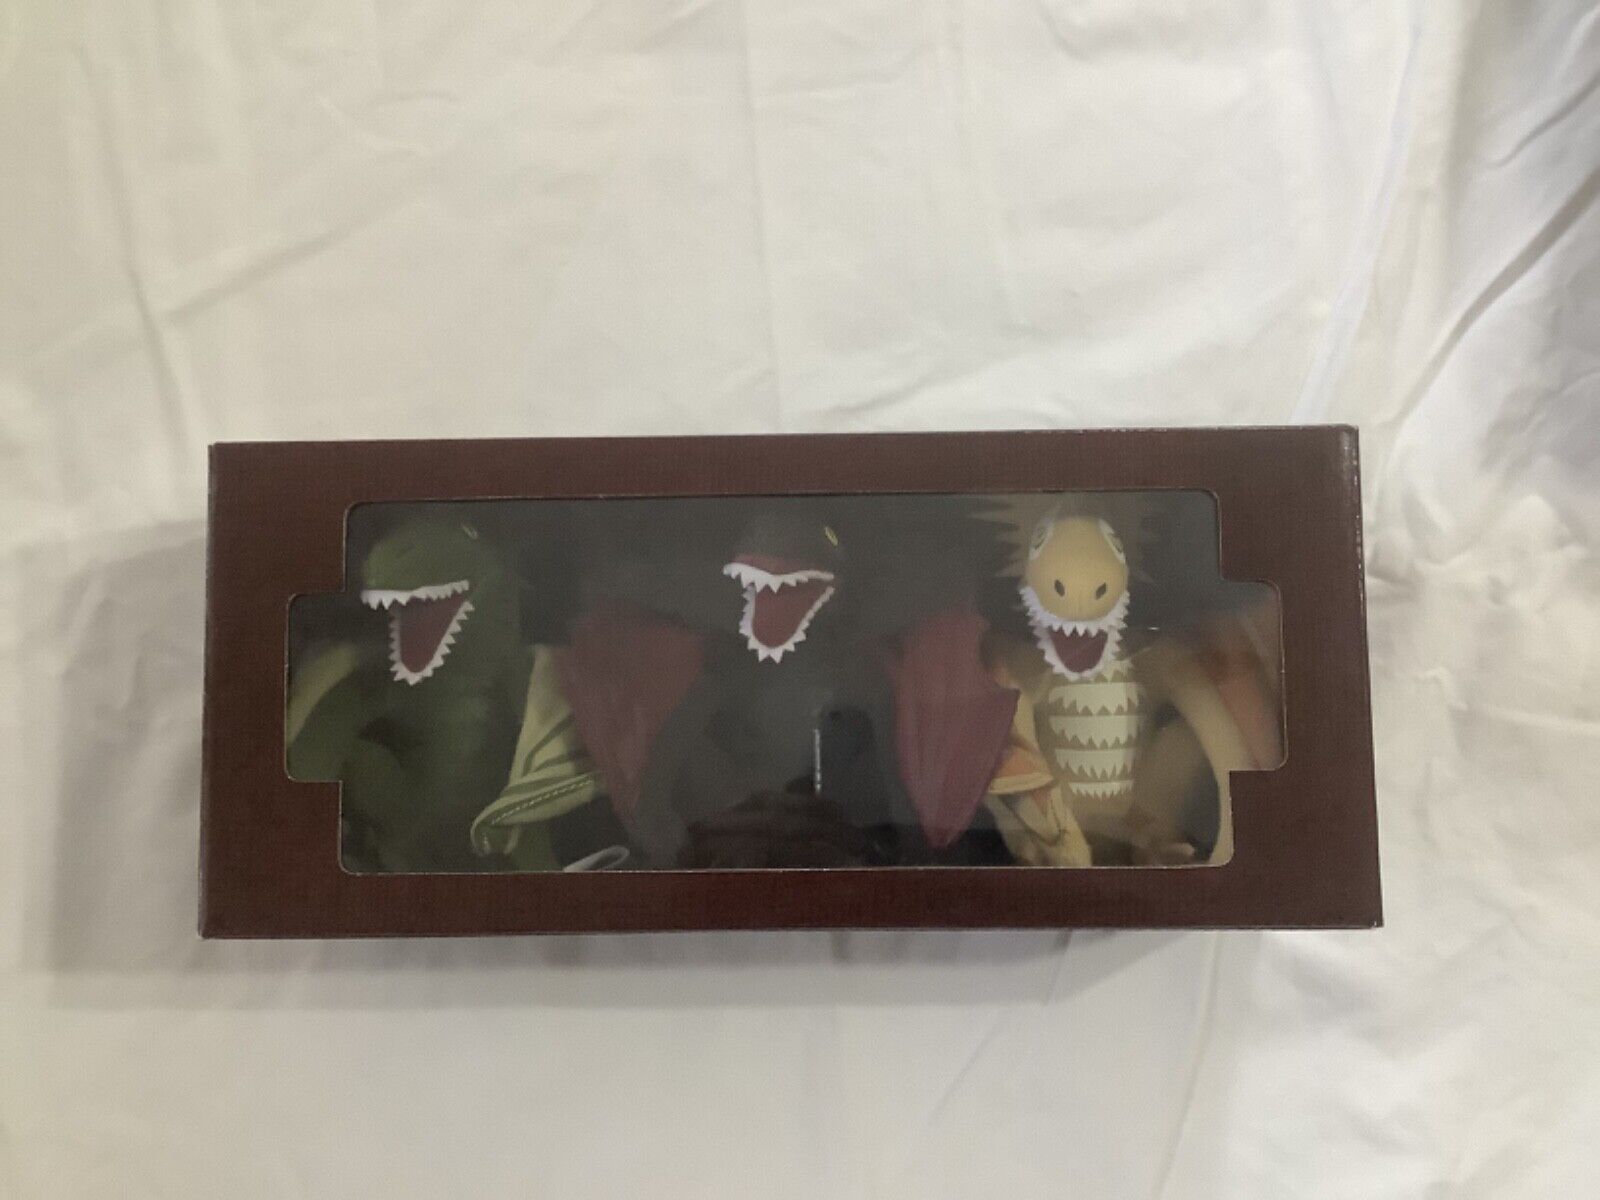 HBO Game Of Thrones SDCC 2017 Convention Exclusive LE #494 Plush Dragon Box Set